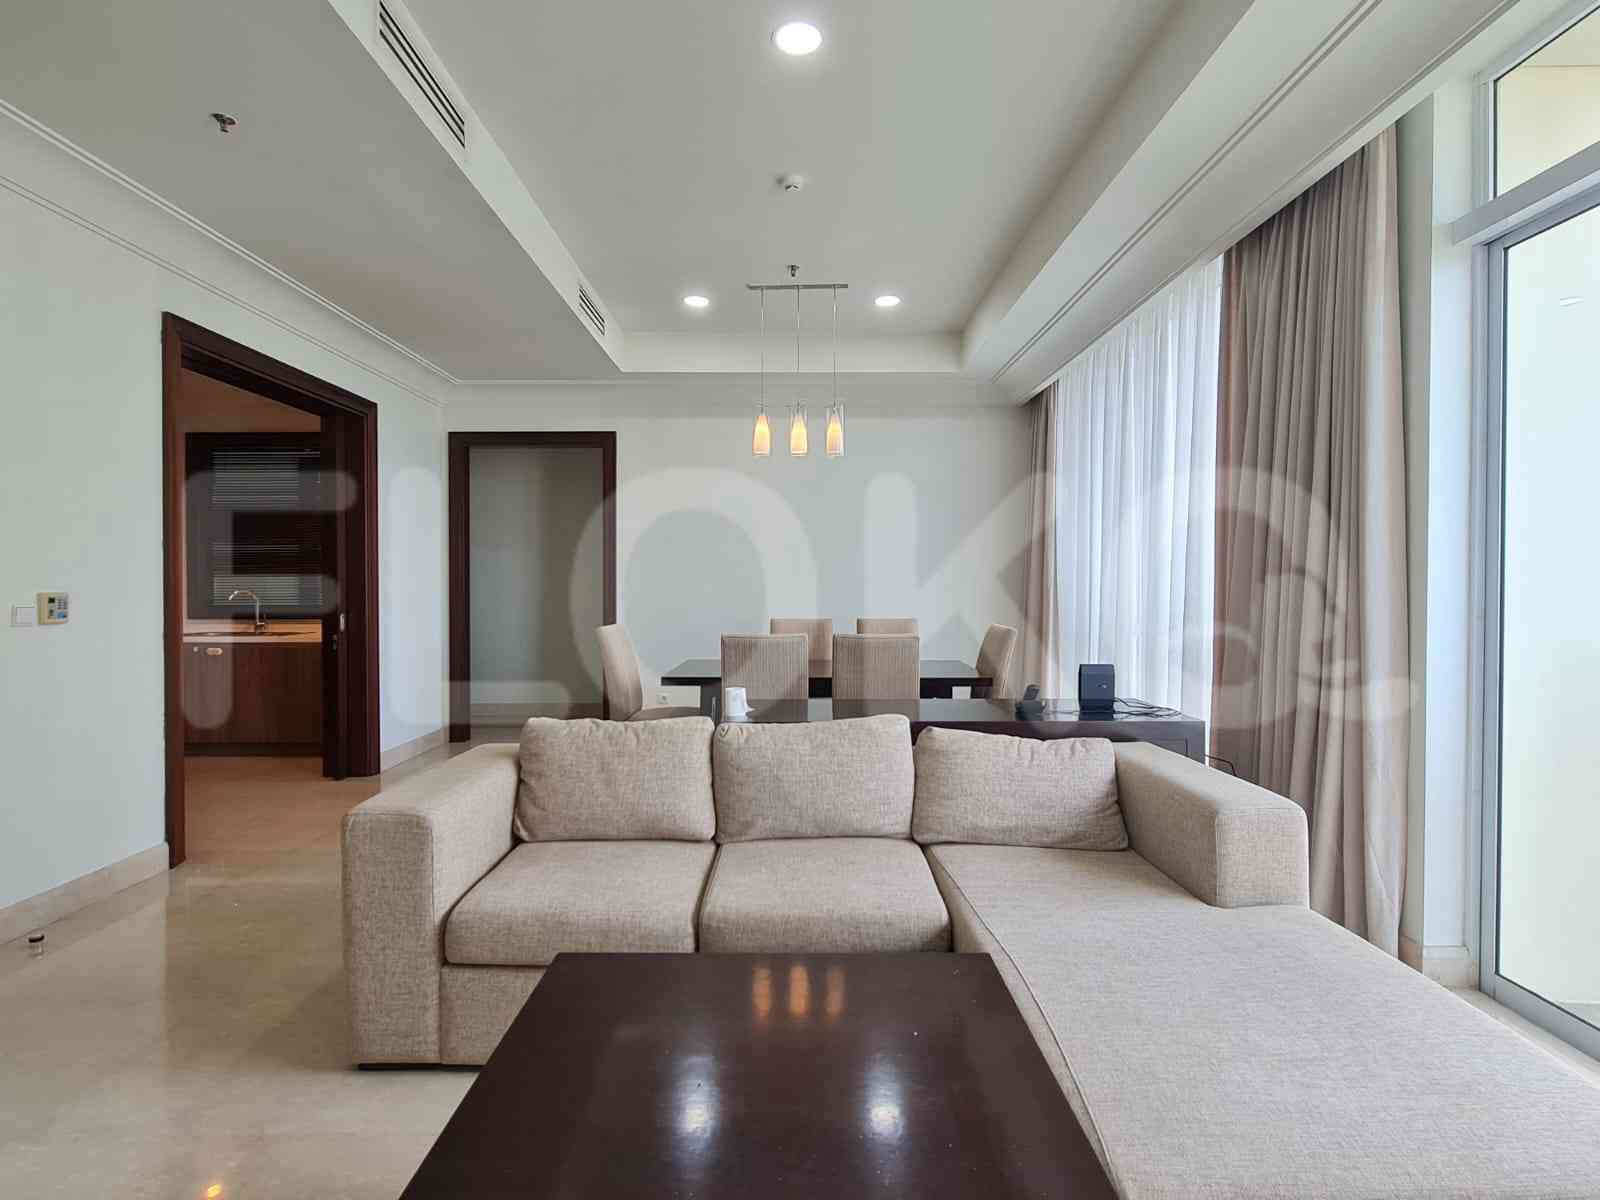 3 Bedroom on 23rd Floor for Rent in Pakubuwono View - fga8fc 1